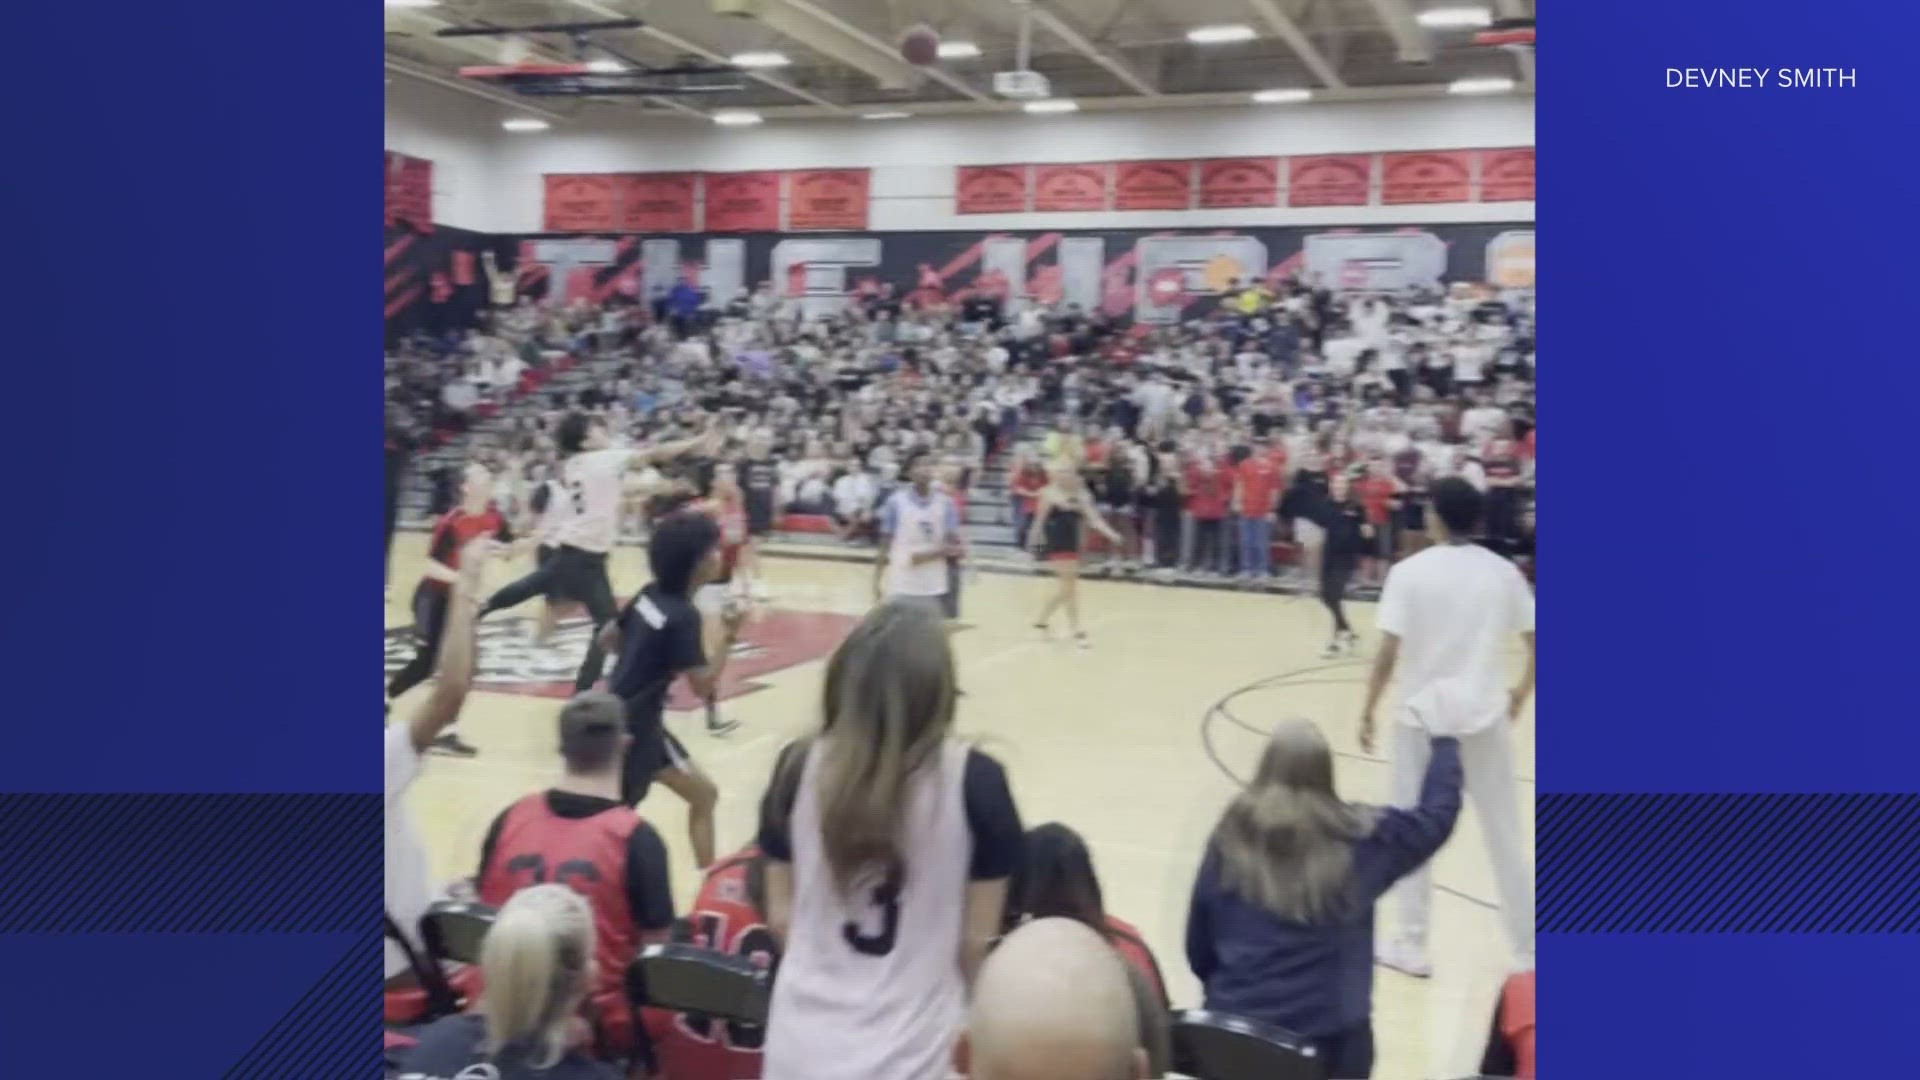 The student was surrounded and cheered on by students after sinking the buzzer-beater.